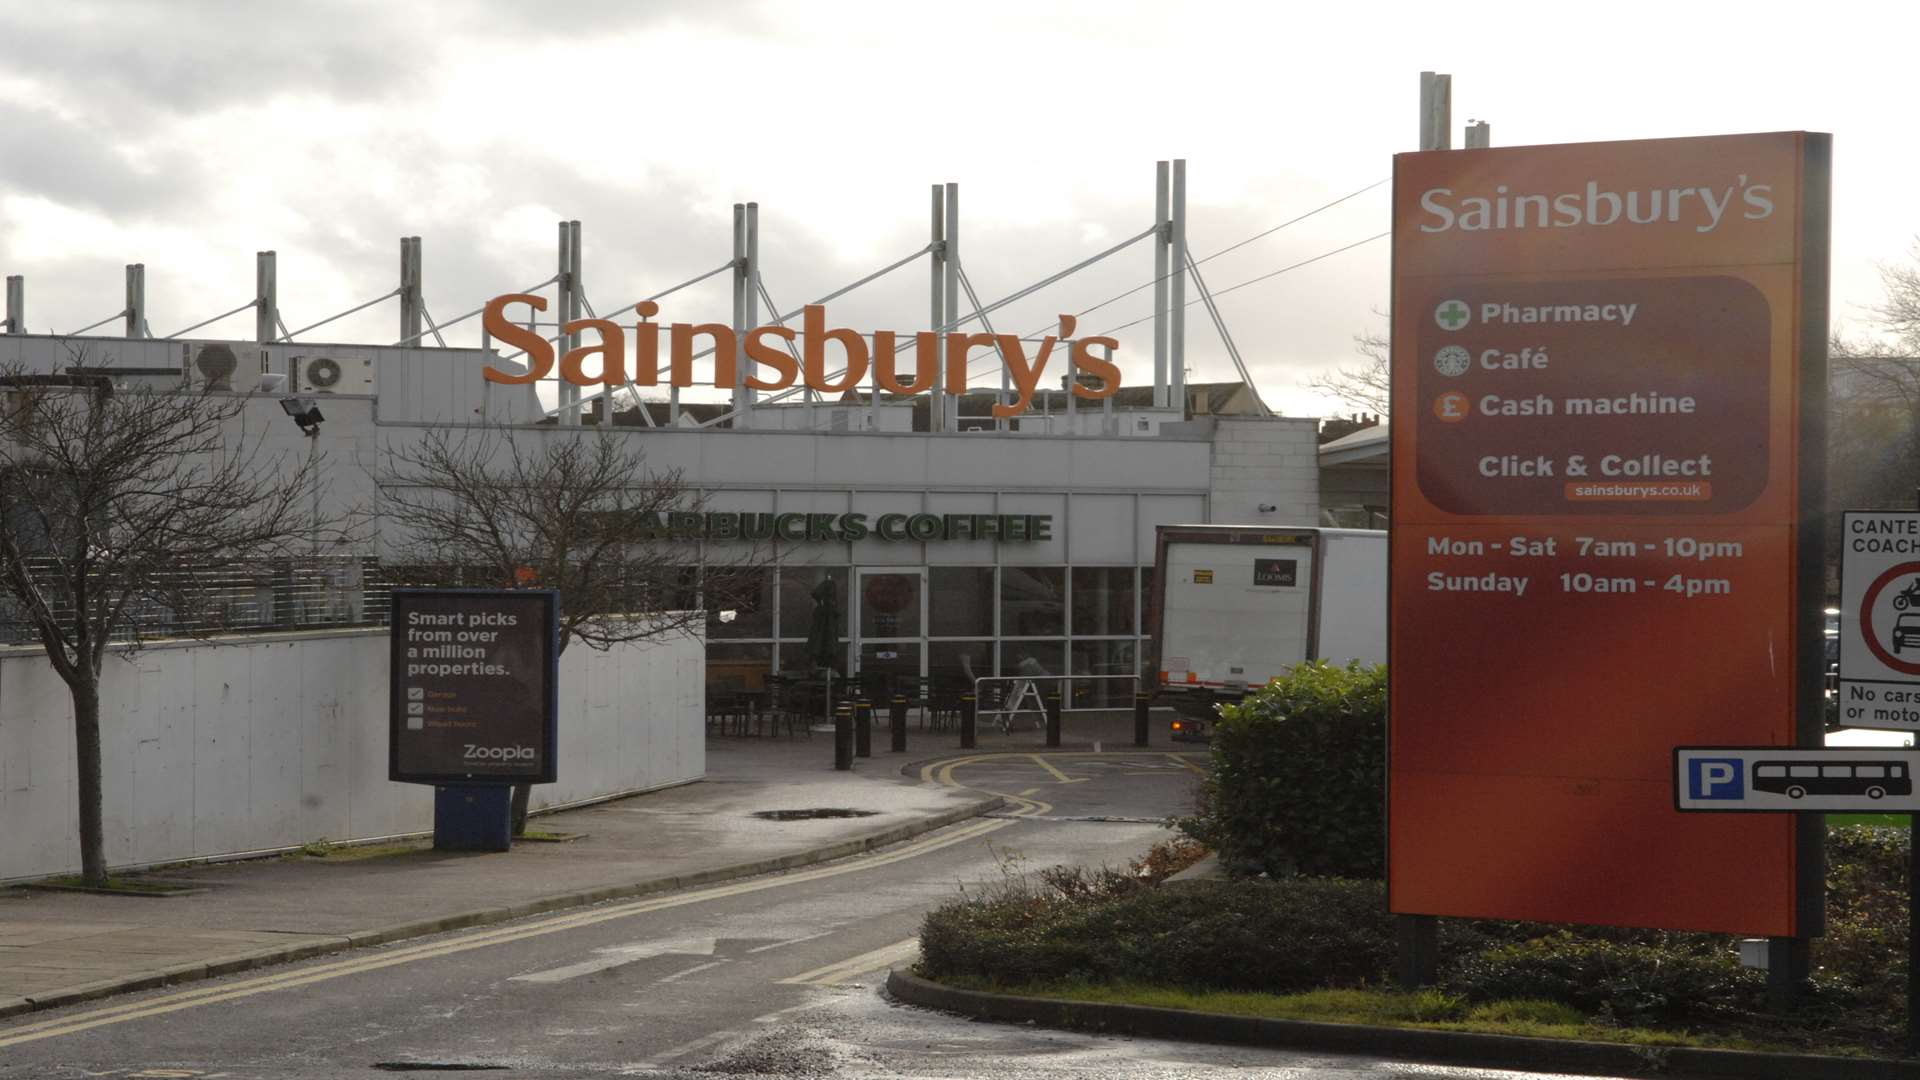 The attack happened near the Sainsbury's store in Canterbury